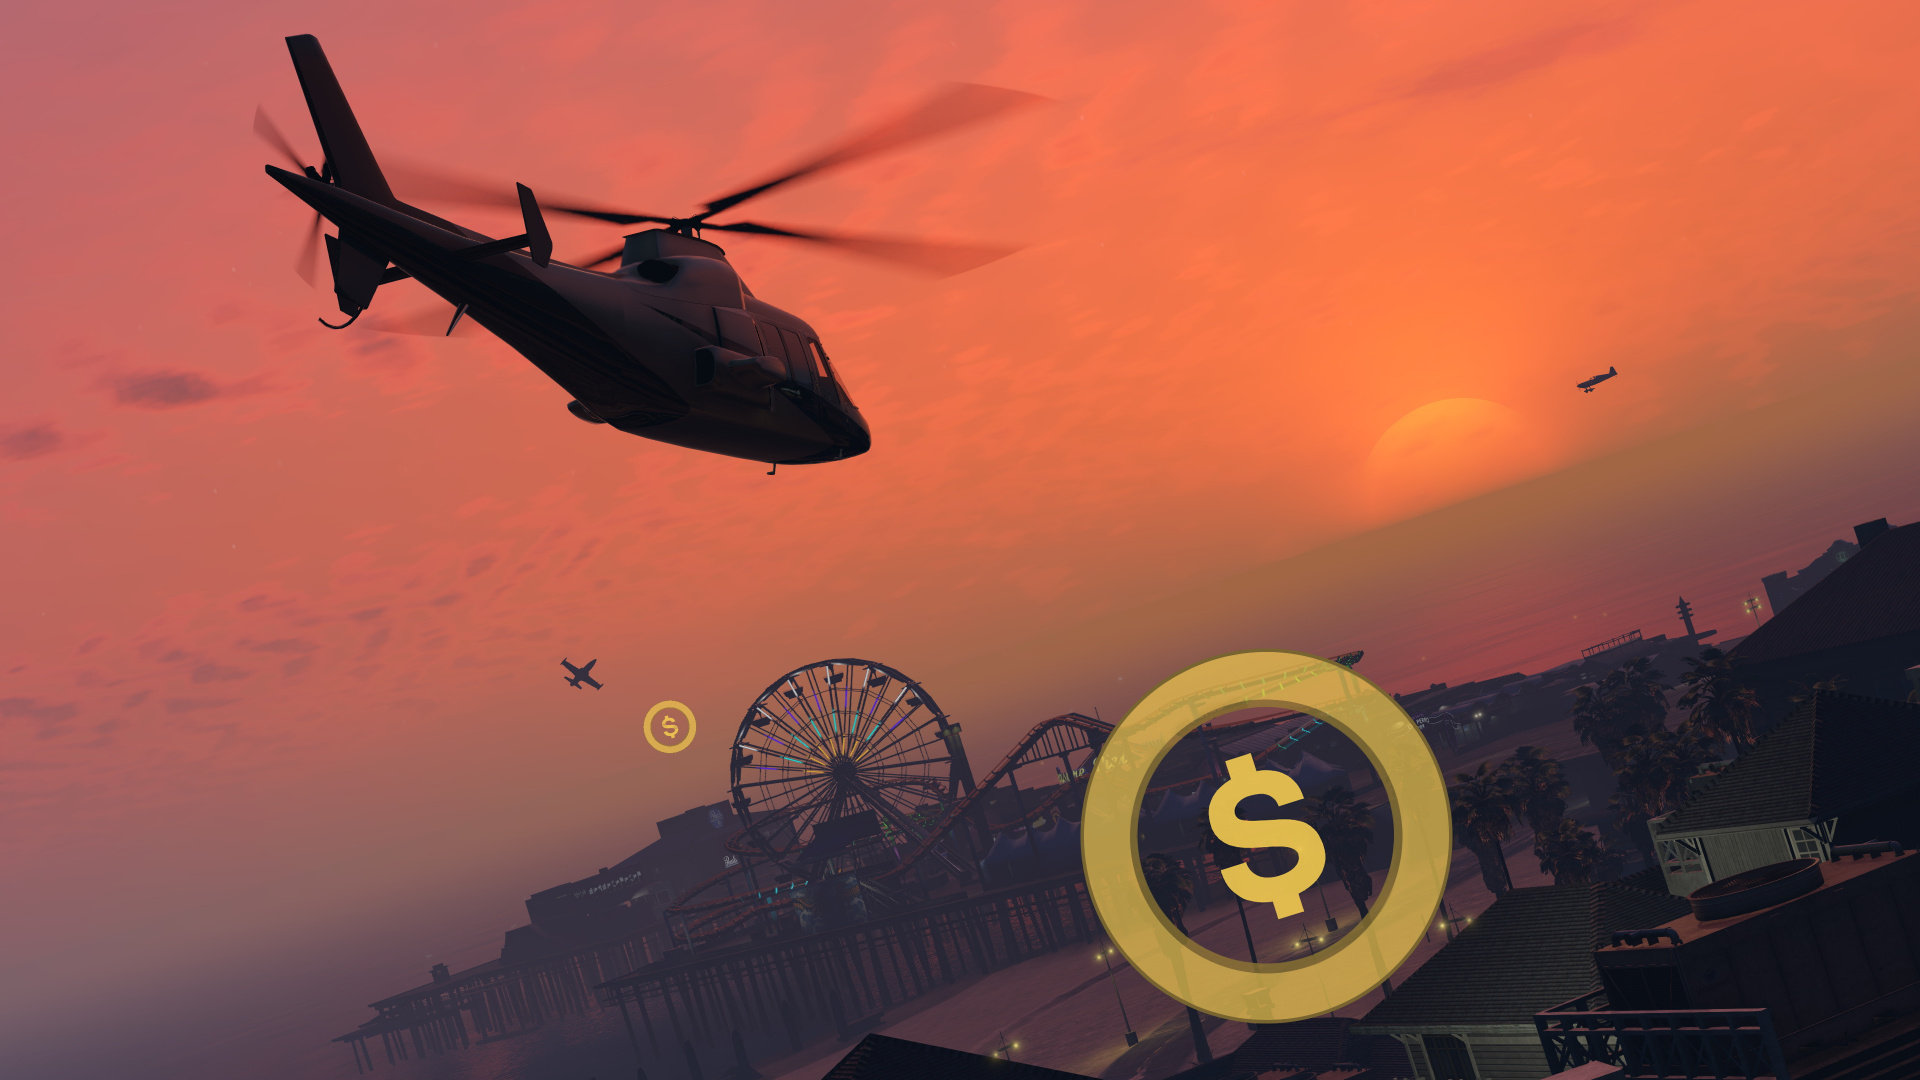 Grand Theft Auto v, Rockstar Games, Open World, Playstation 4, Helicopter. Wallpaper in 1920x1080 Resolution